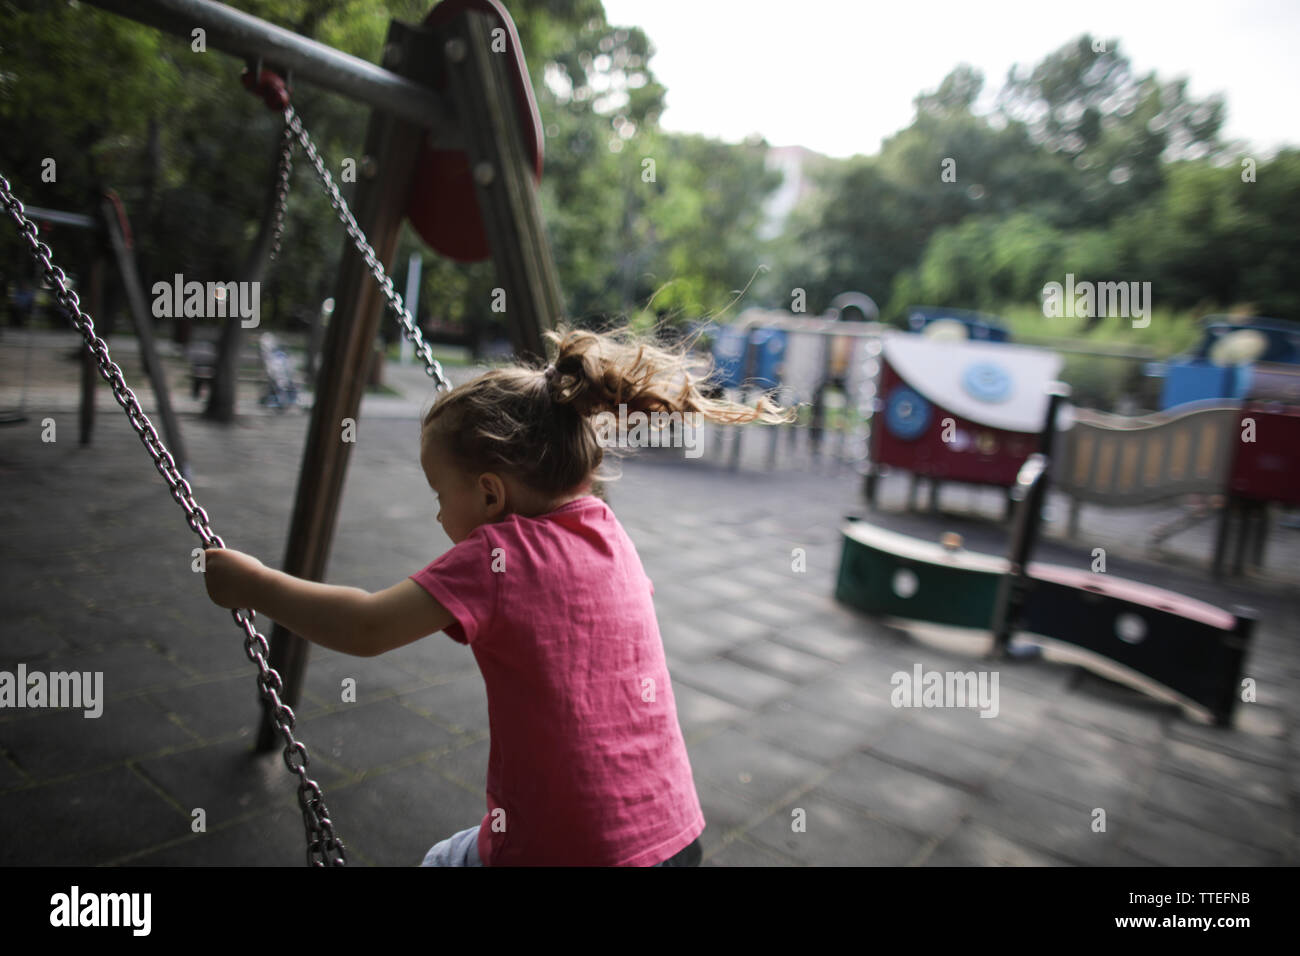 Young girl swinging in a kids playground without anyone around. Stock Photo